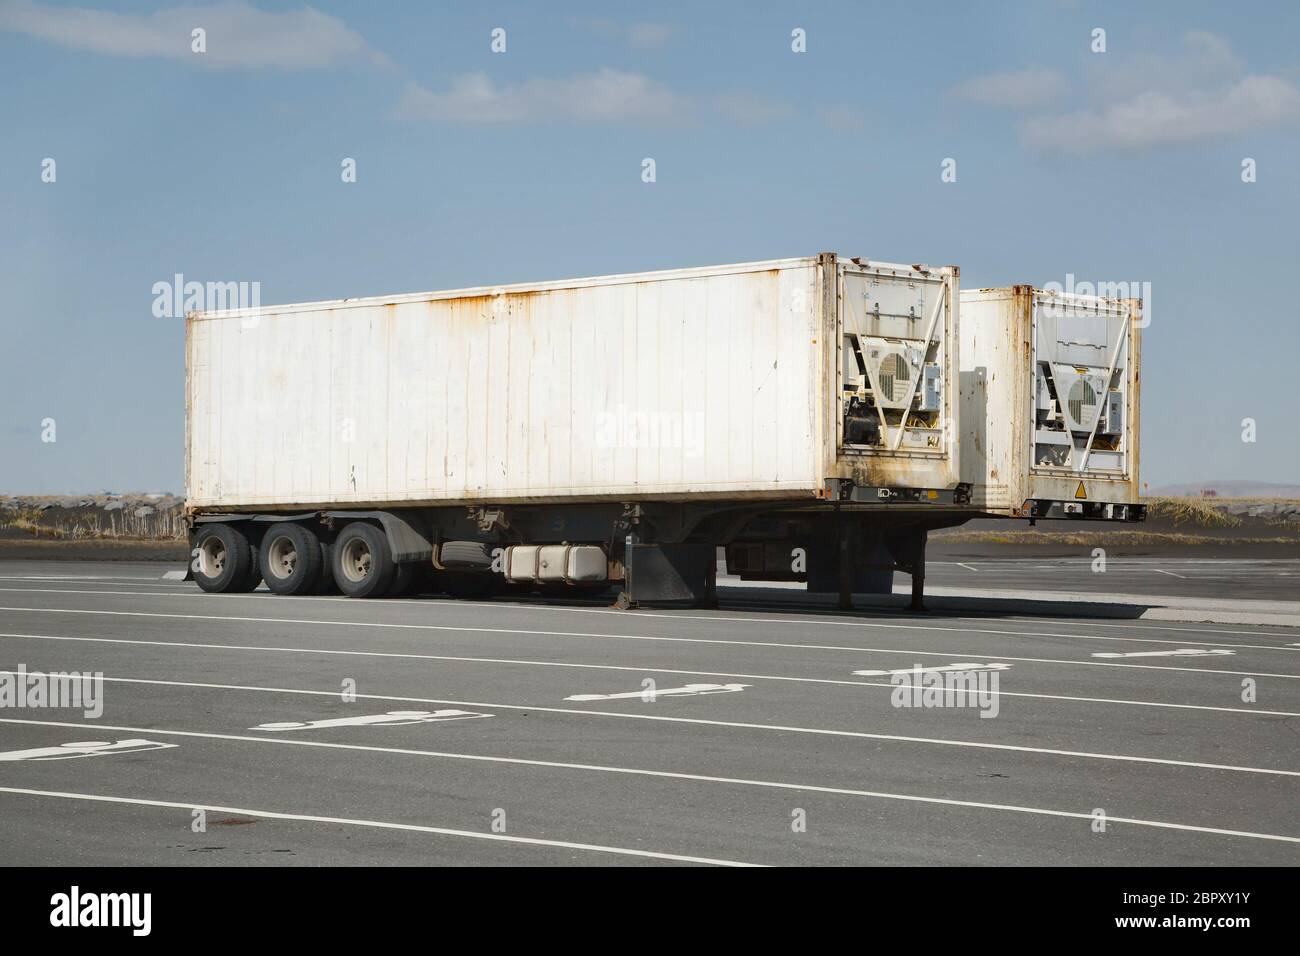 Cargo containers in truck trailers in a parking lot in Iceland Stock Photo